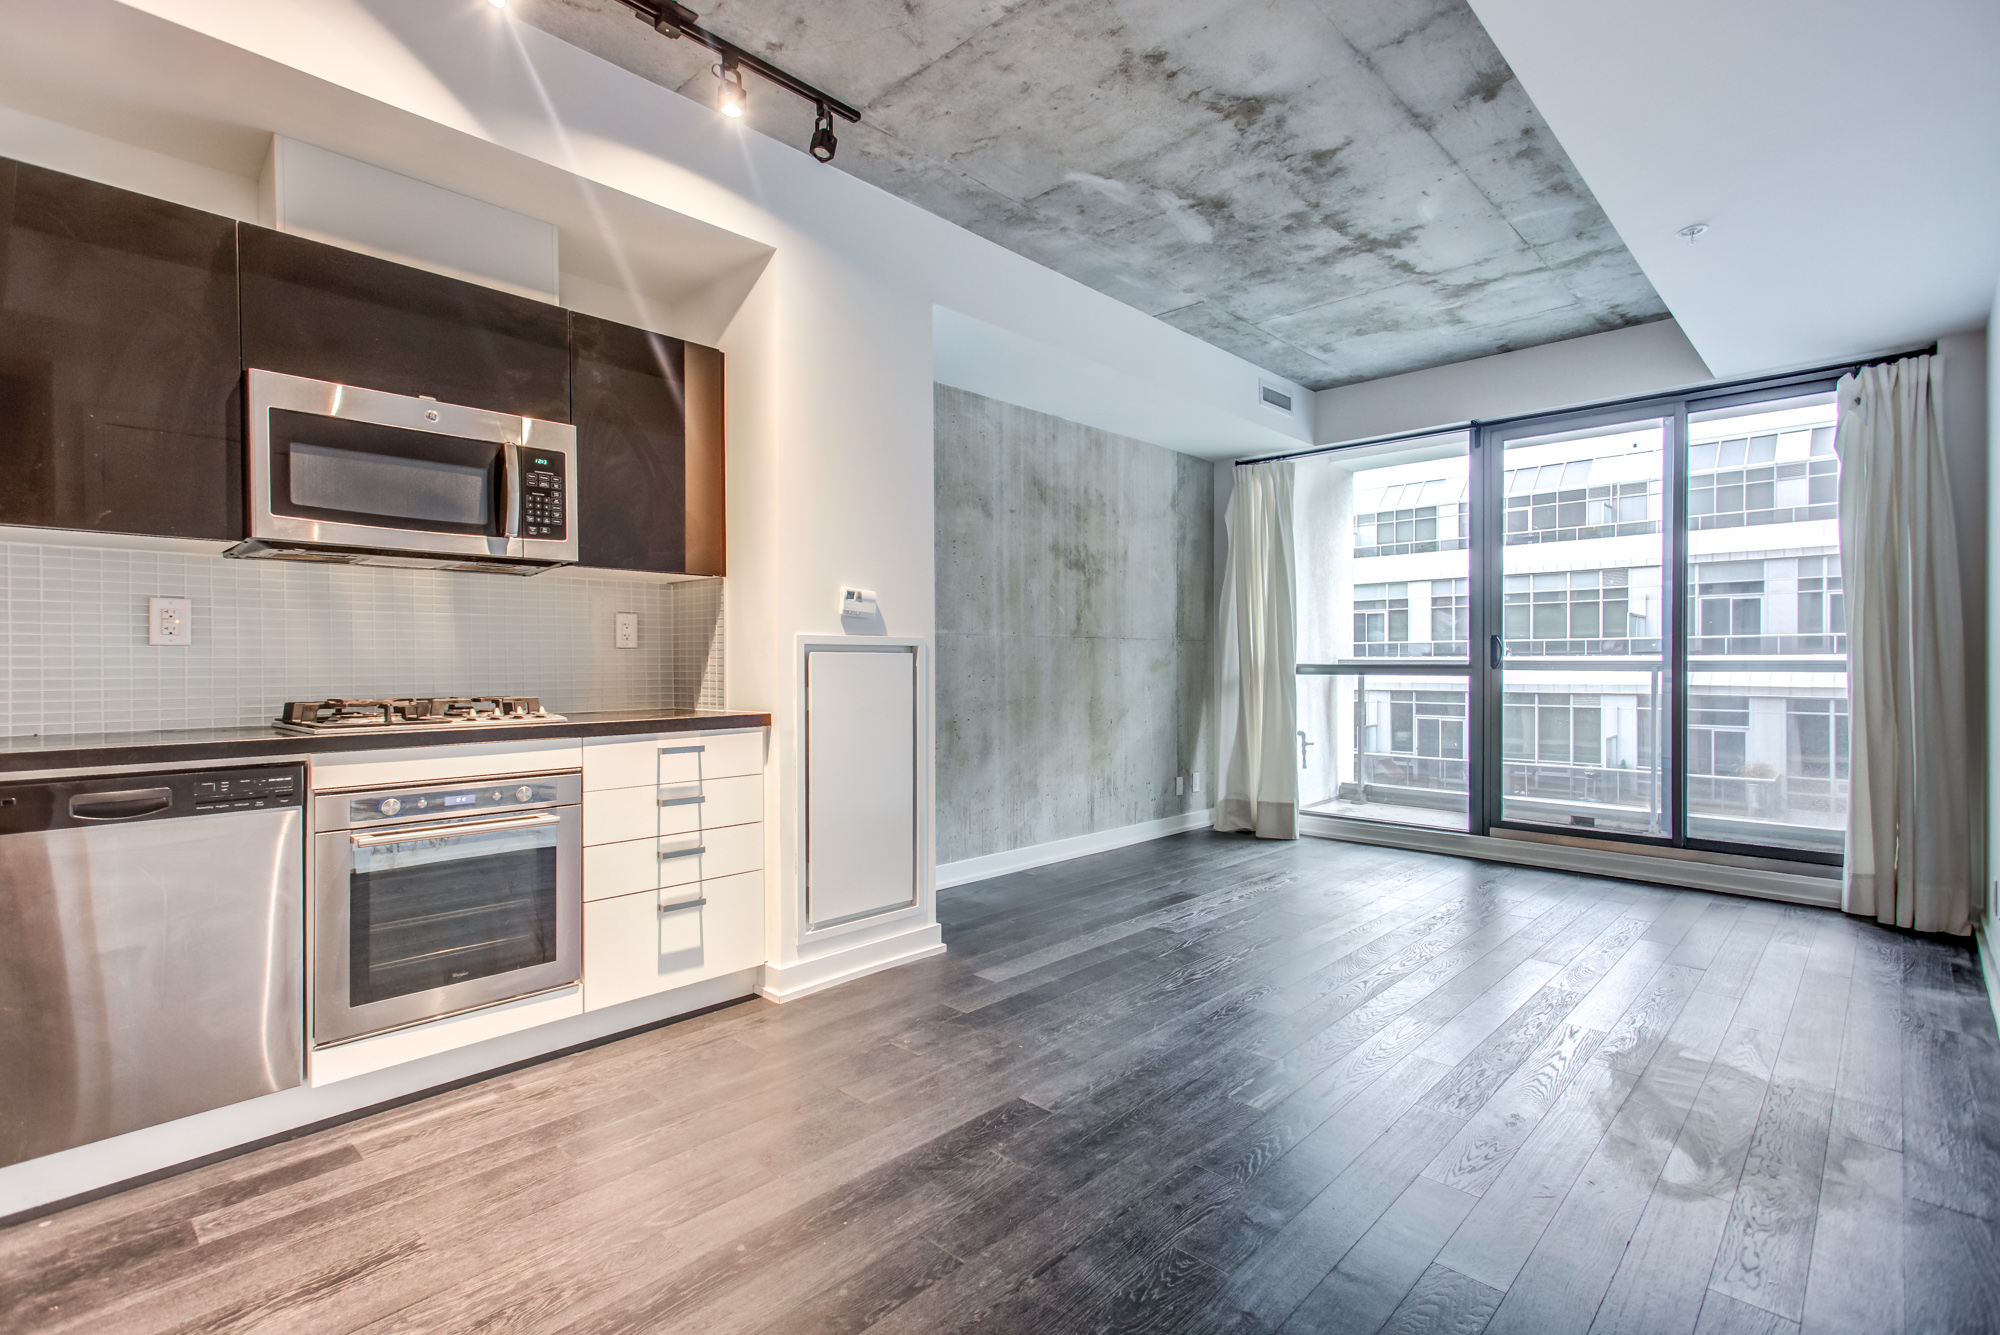 39 Brant St Unit 918, Brant Park Lofts, industrial-style kitchen, living room and dining room with laminate floors.